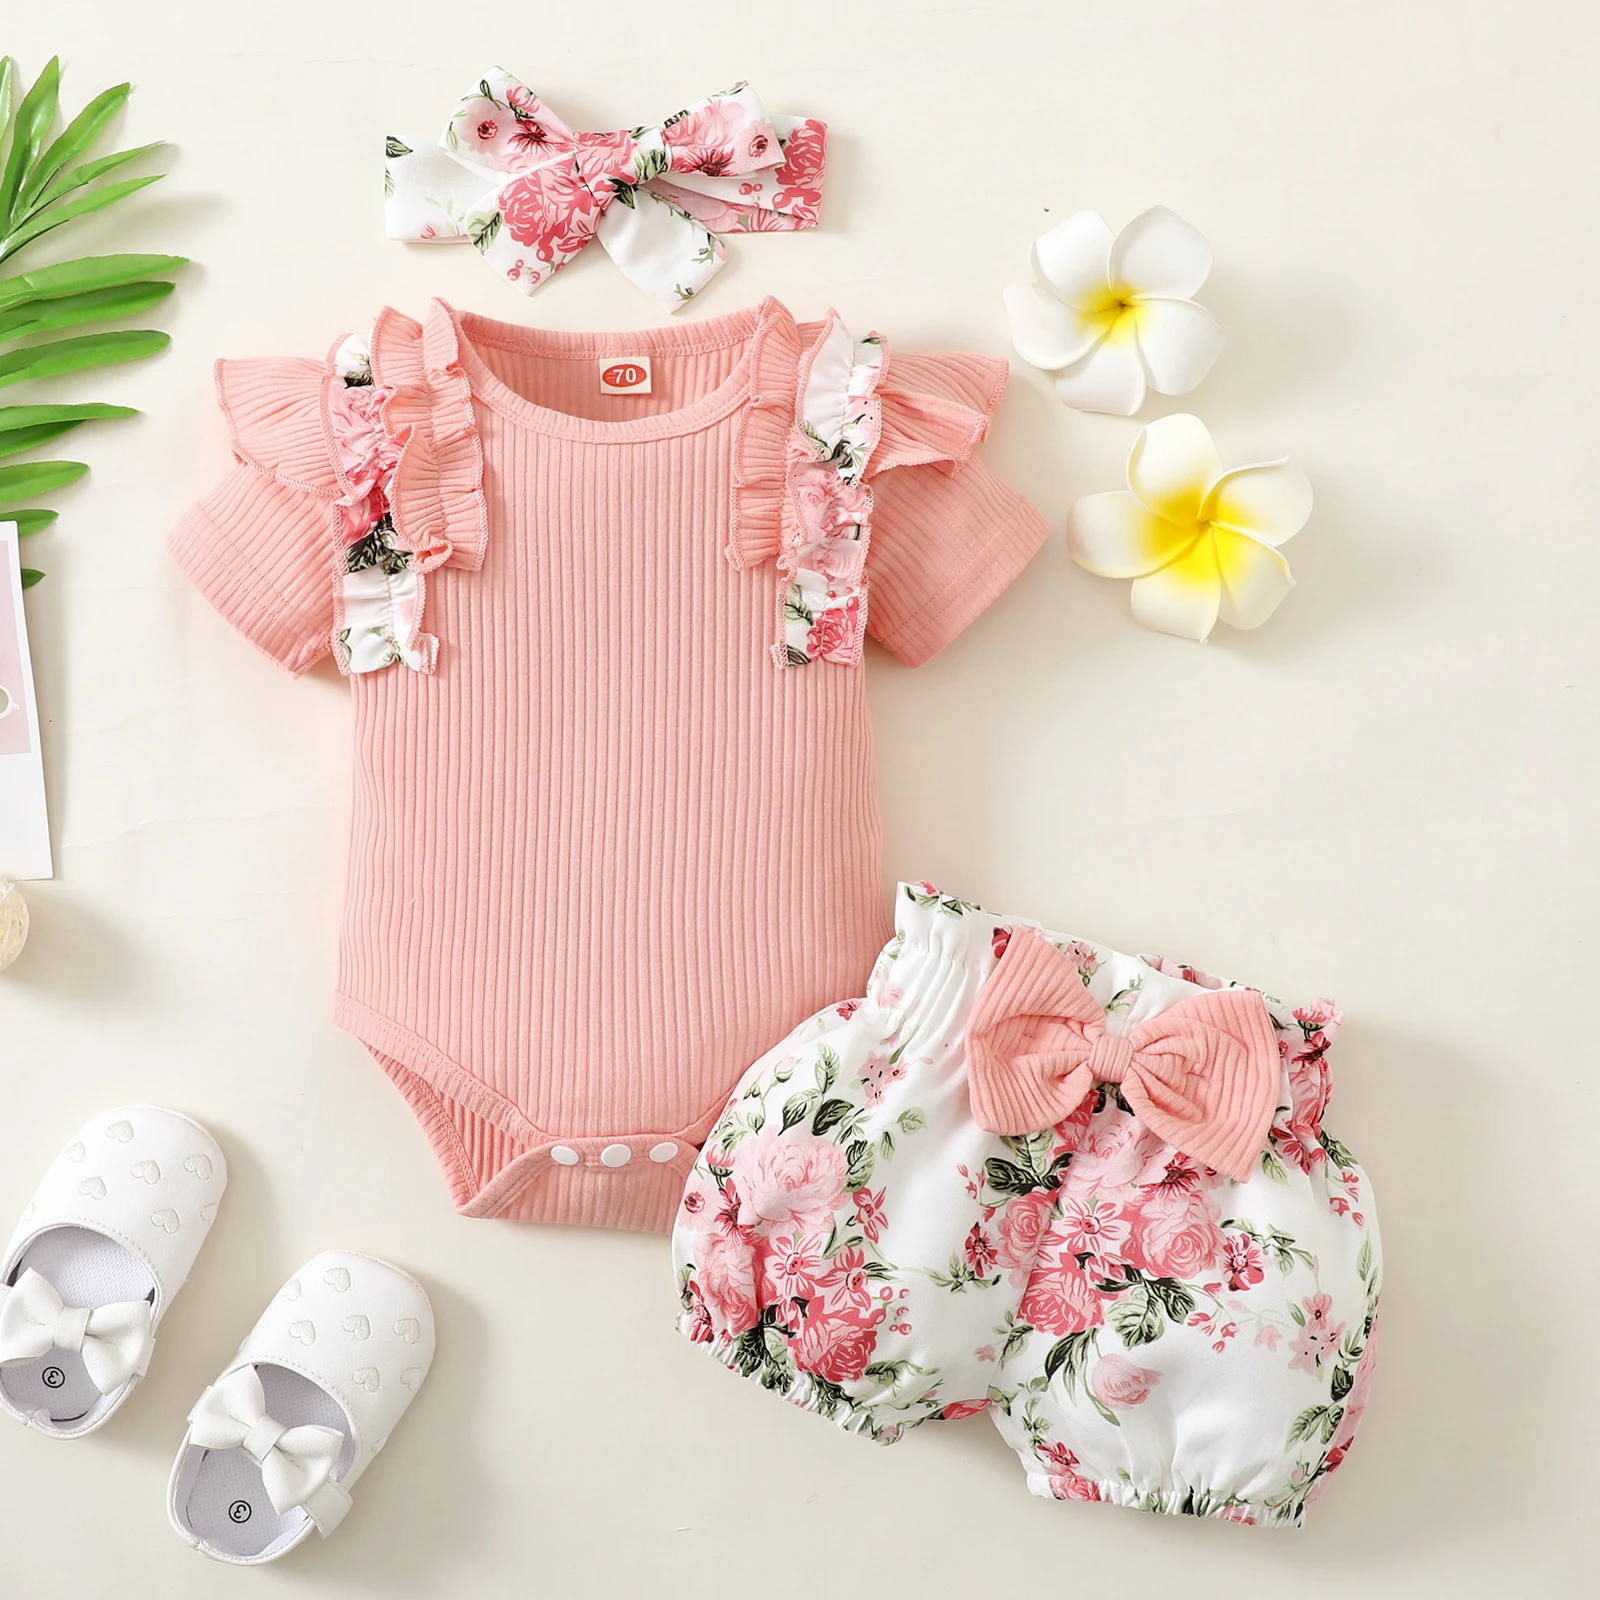 Fashion Summer Newborn Baby Girl Clothes Set Short Sleeve Ruffle Romper Tops Floral Print Shorts Headband Infant 3Pcs Outfits Baby Clothing Set expensive